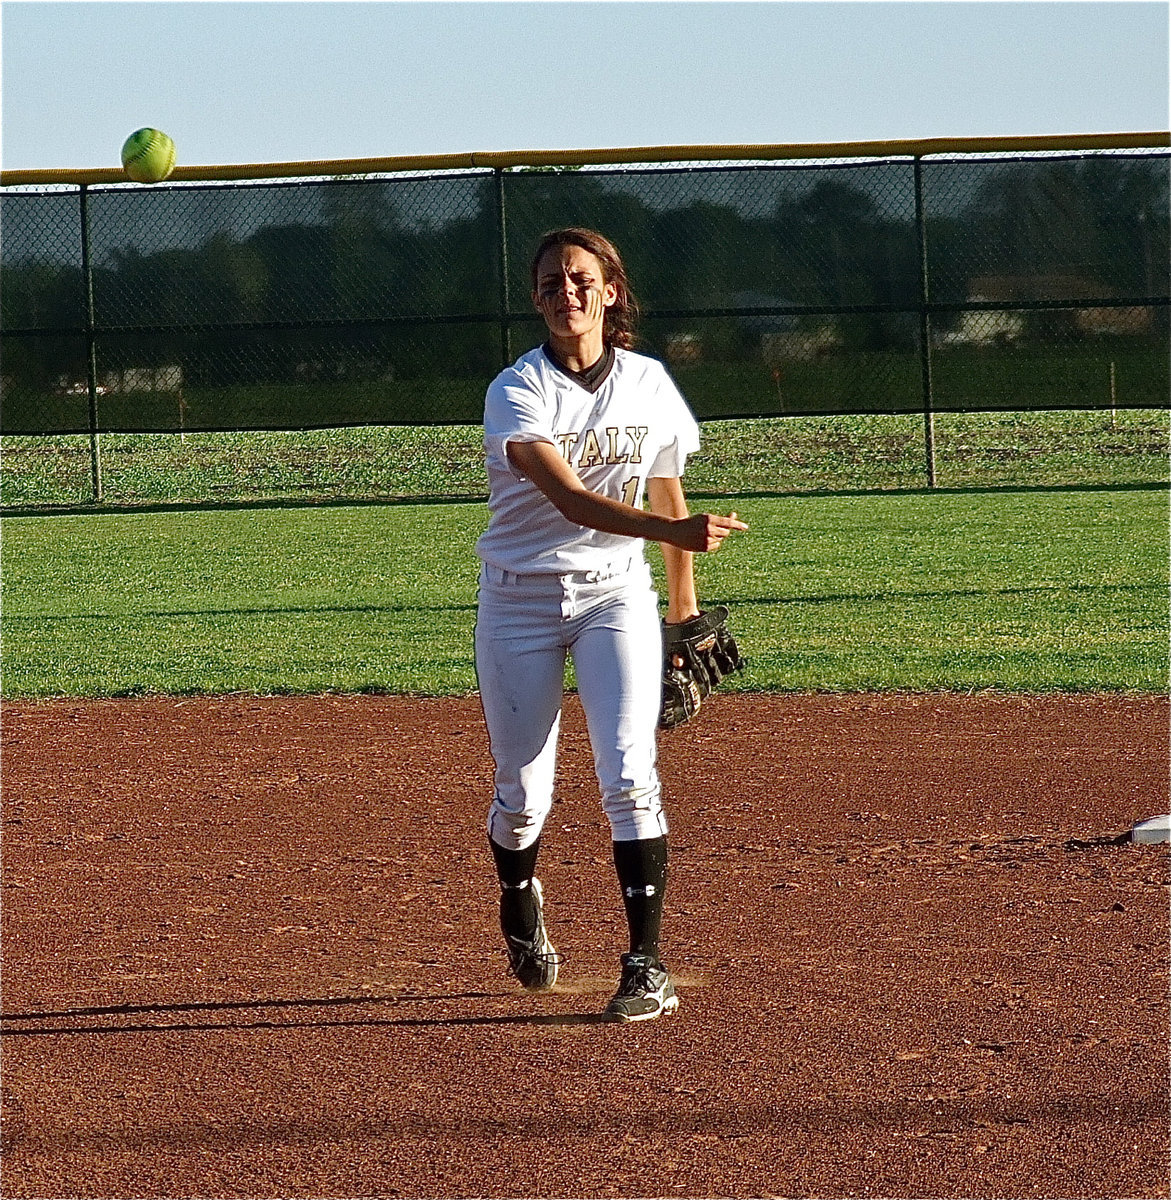 Image: Lady Gladiator, Anna Viers, received 1st Team All-District Shortstop in District 15-2A for the 2011 season.